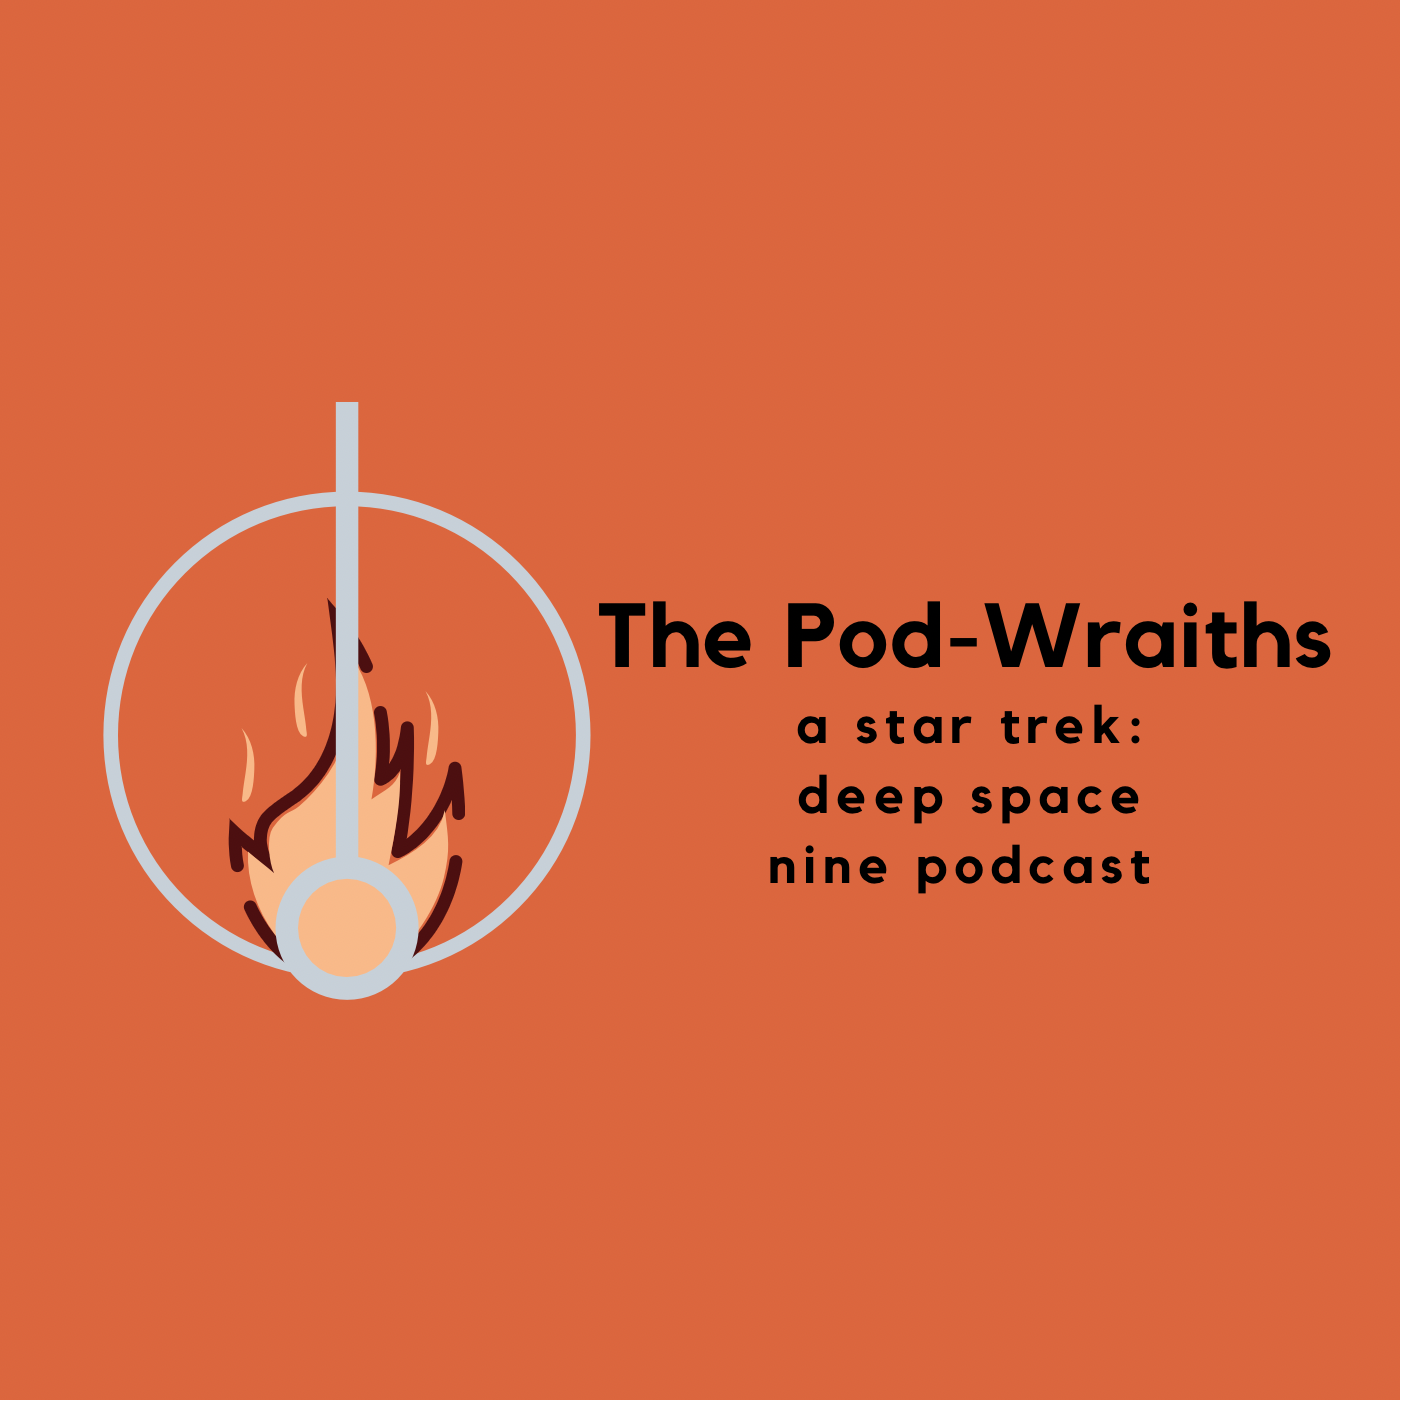 Episode 0: The Pod-Wraiths are here!